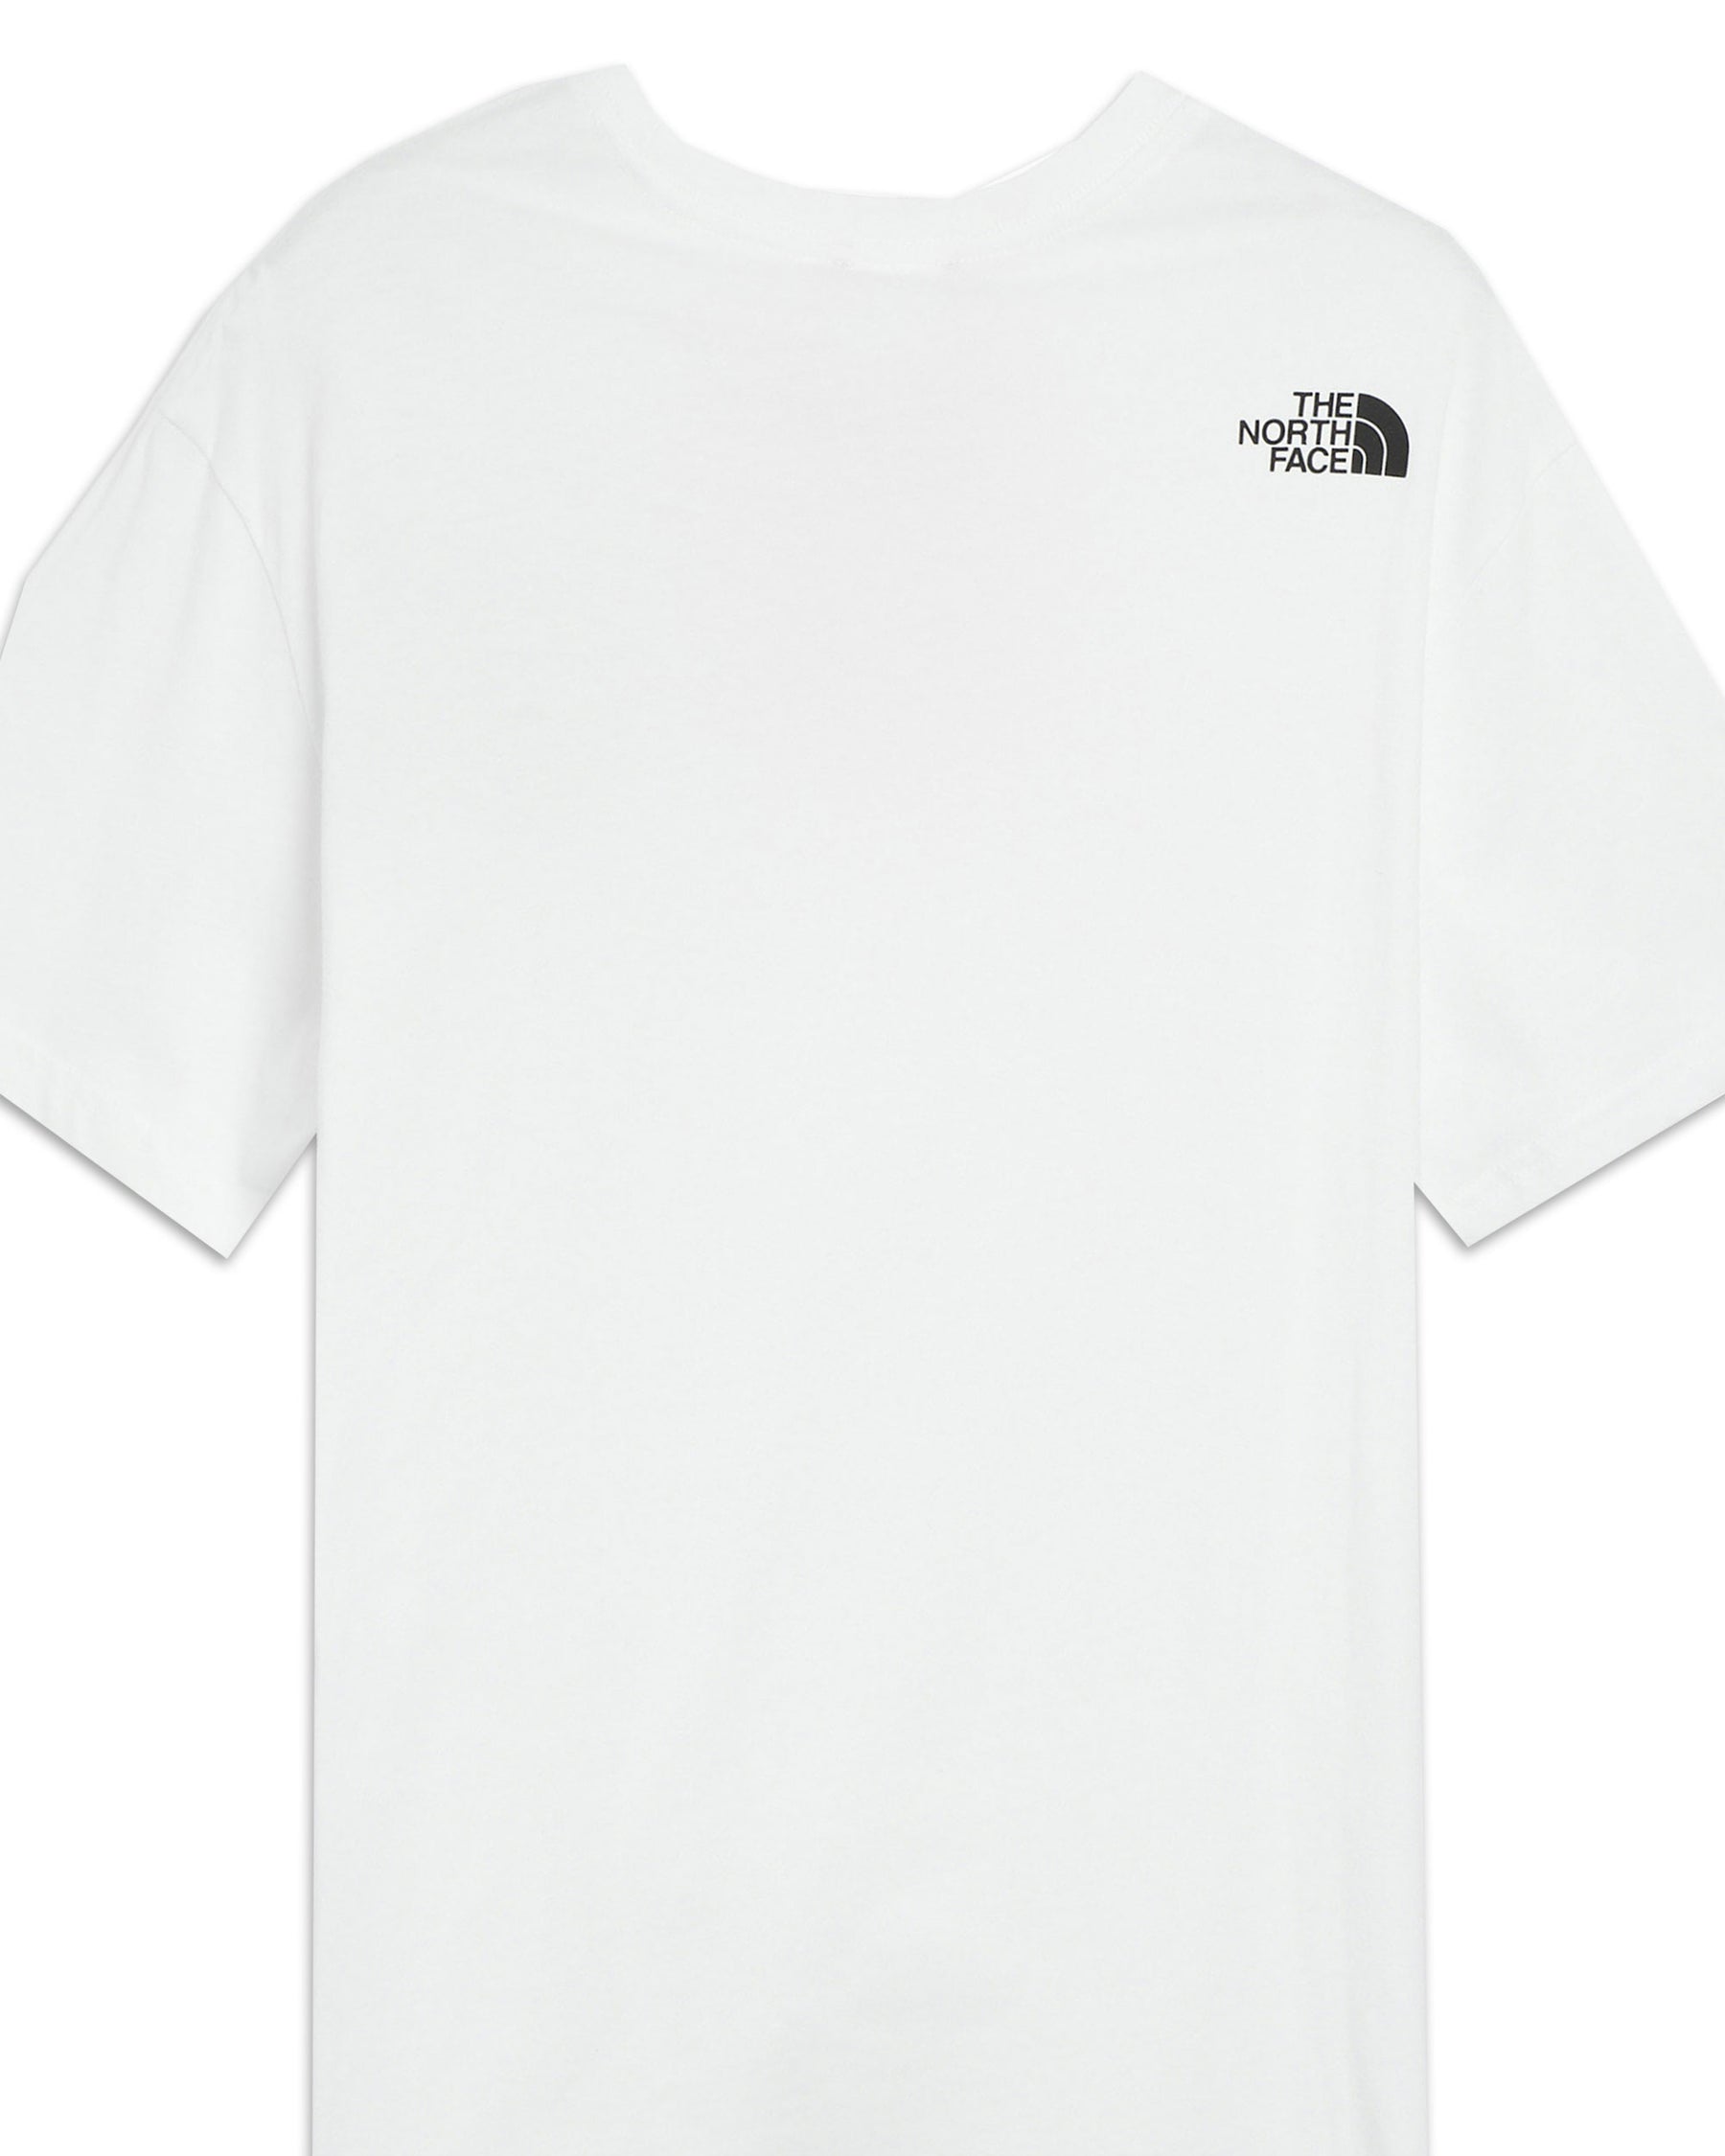 T-Shirt Uomo The North Face Fine Tee Bianco